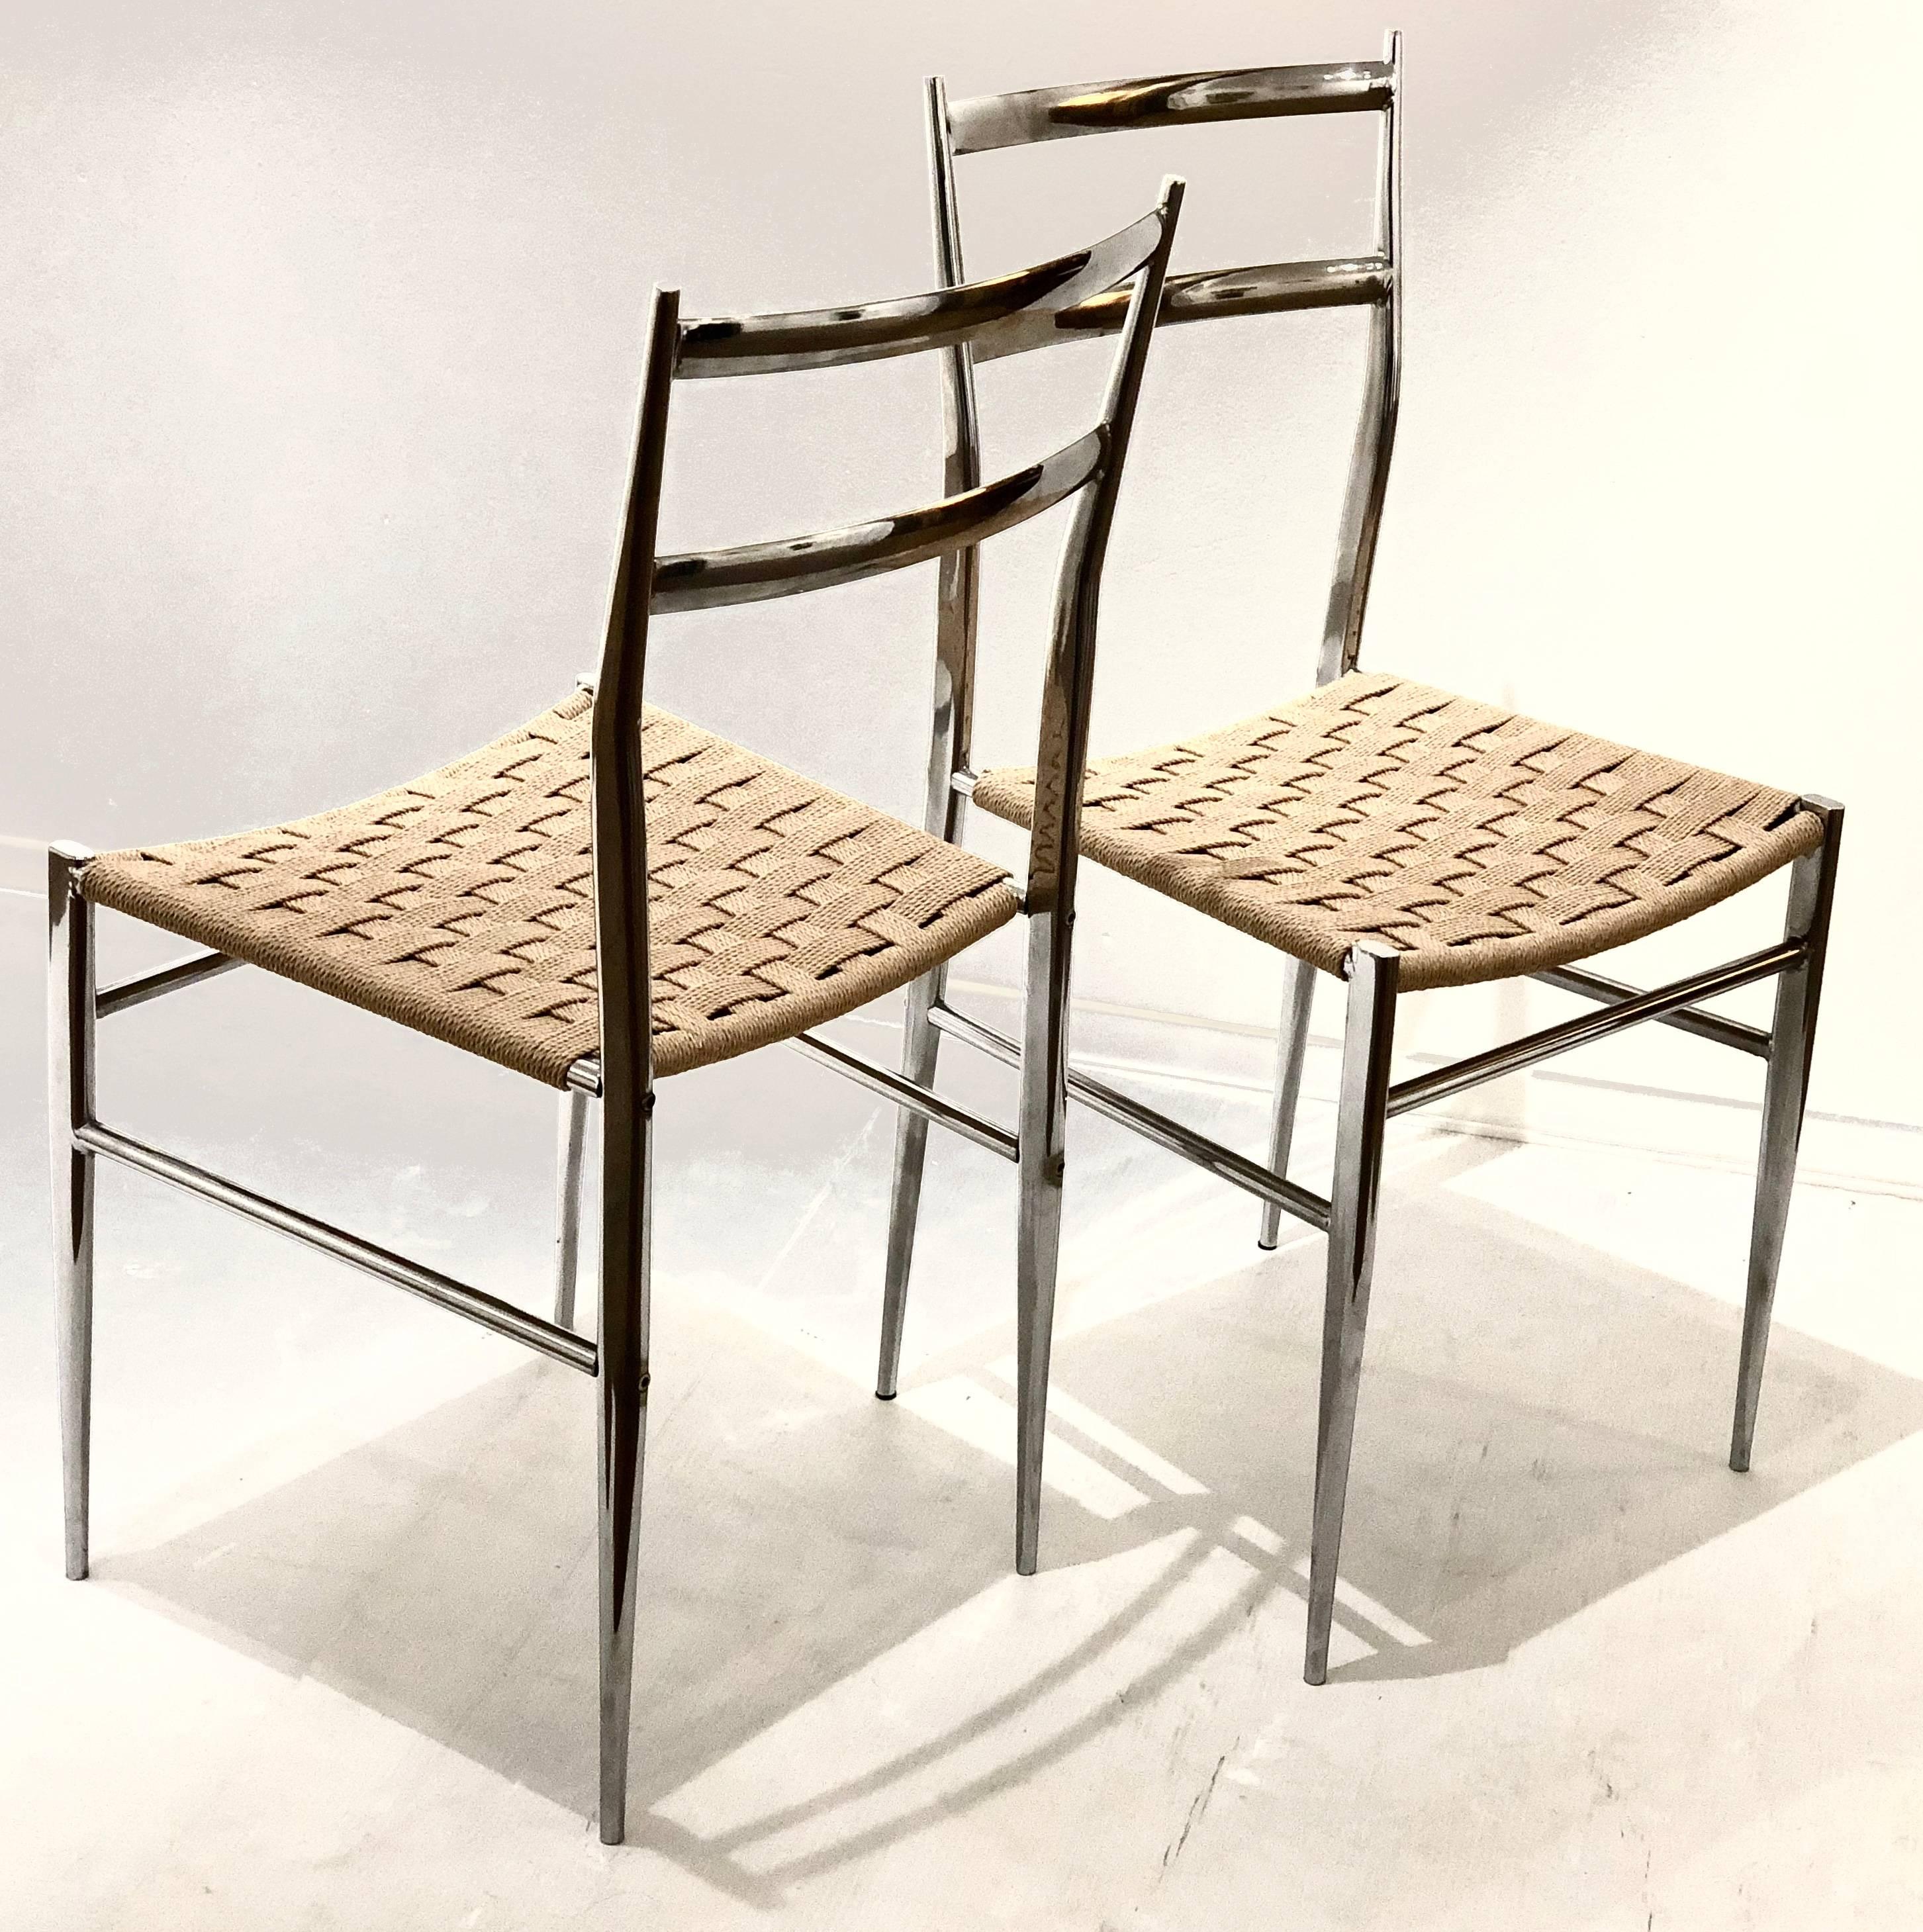 Nice and elegant pair of Superleggera style chairs designed after Gio Ponti by Phillipe Starck for Driade, in chrome frames with natural woven rope seats, freshly rewoven with Danish bone color cord, in very nice and clean condition. Solid and